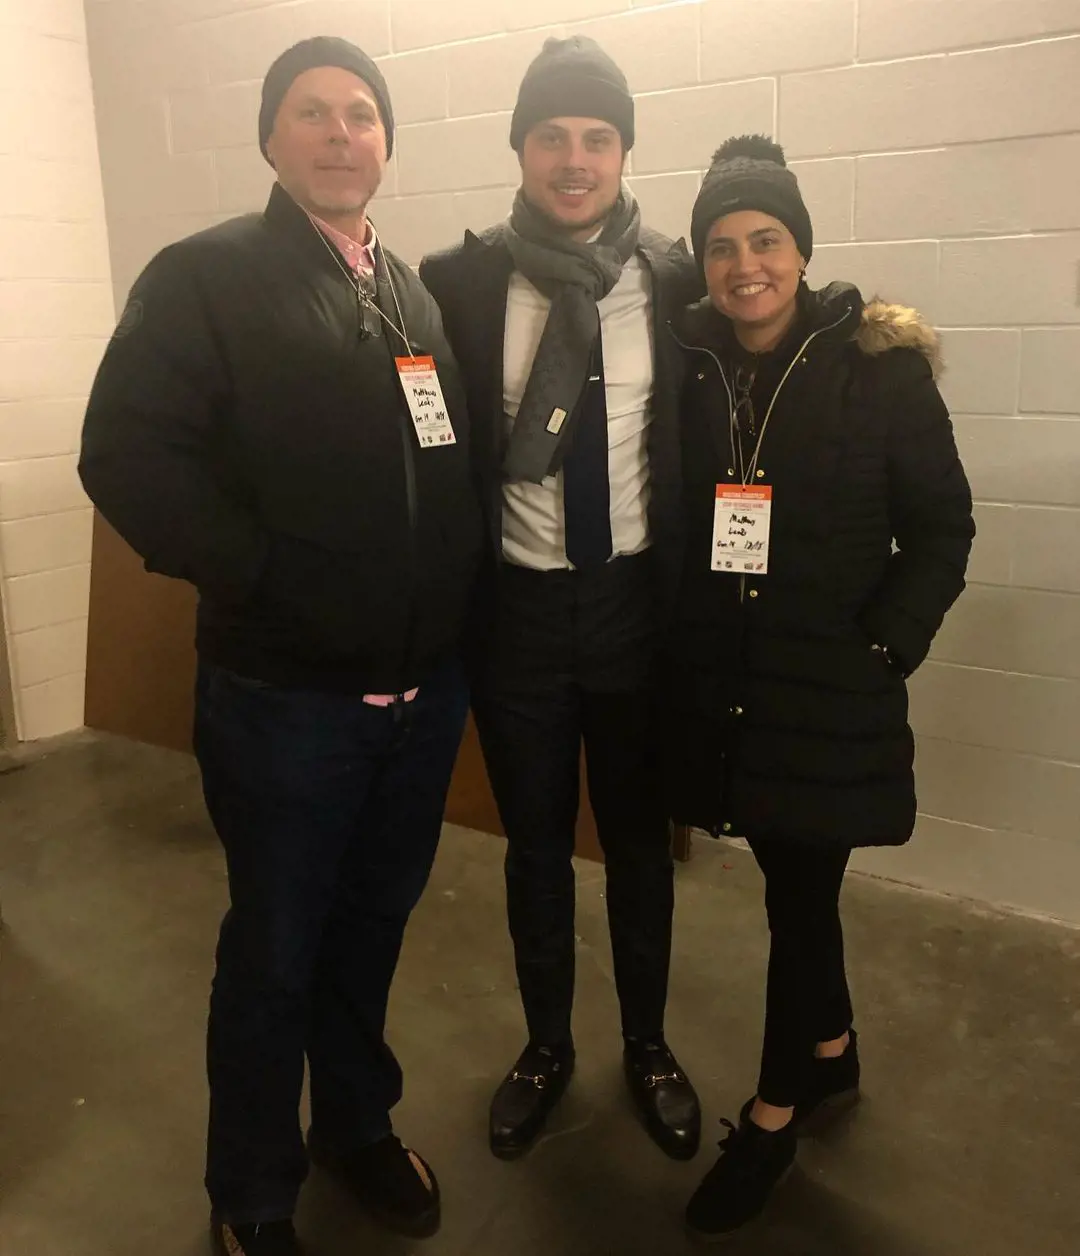 Auston accompanied by his mum Ema and dad Brian before the game in May 2019